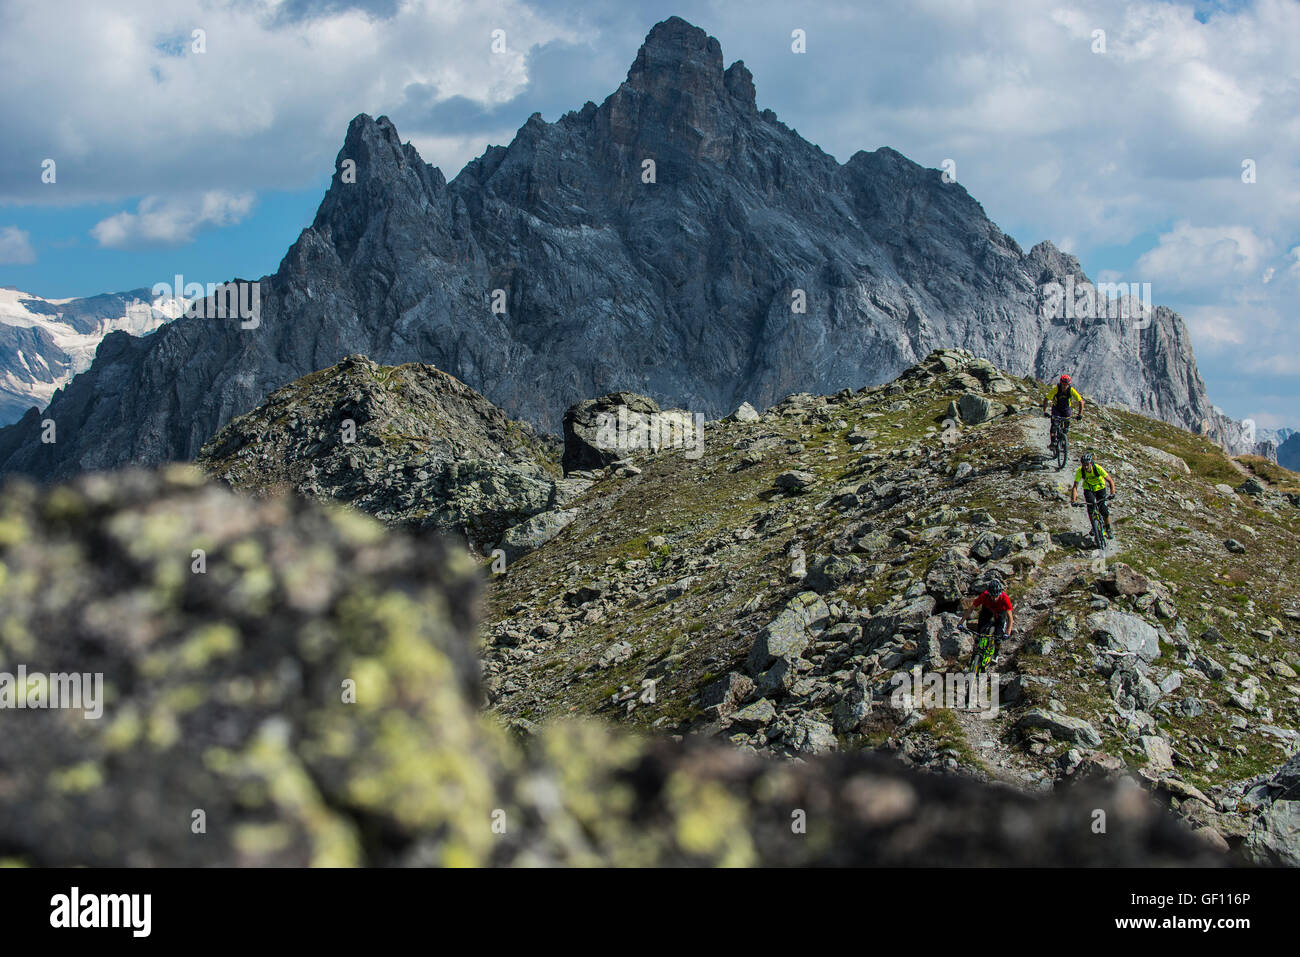 Three mountain bikers ride the ridge between Courchevel and Meribel away from the Aiguille du Fruit peak in the French Alps Stock Photo